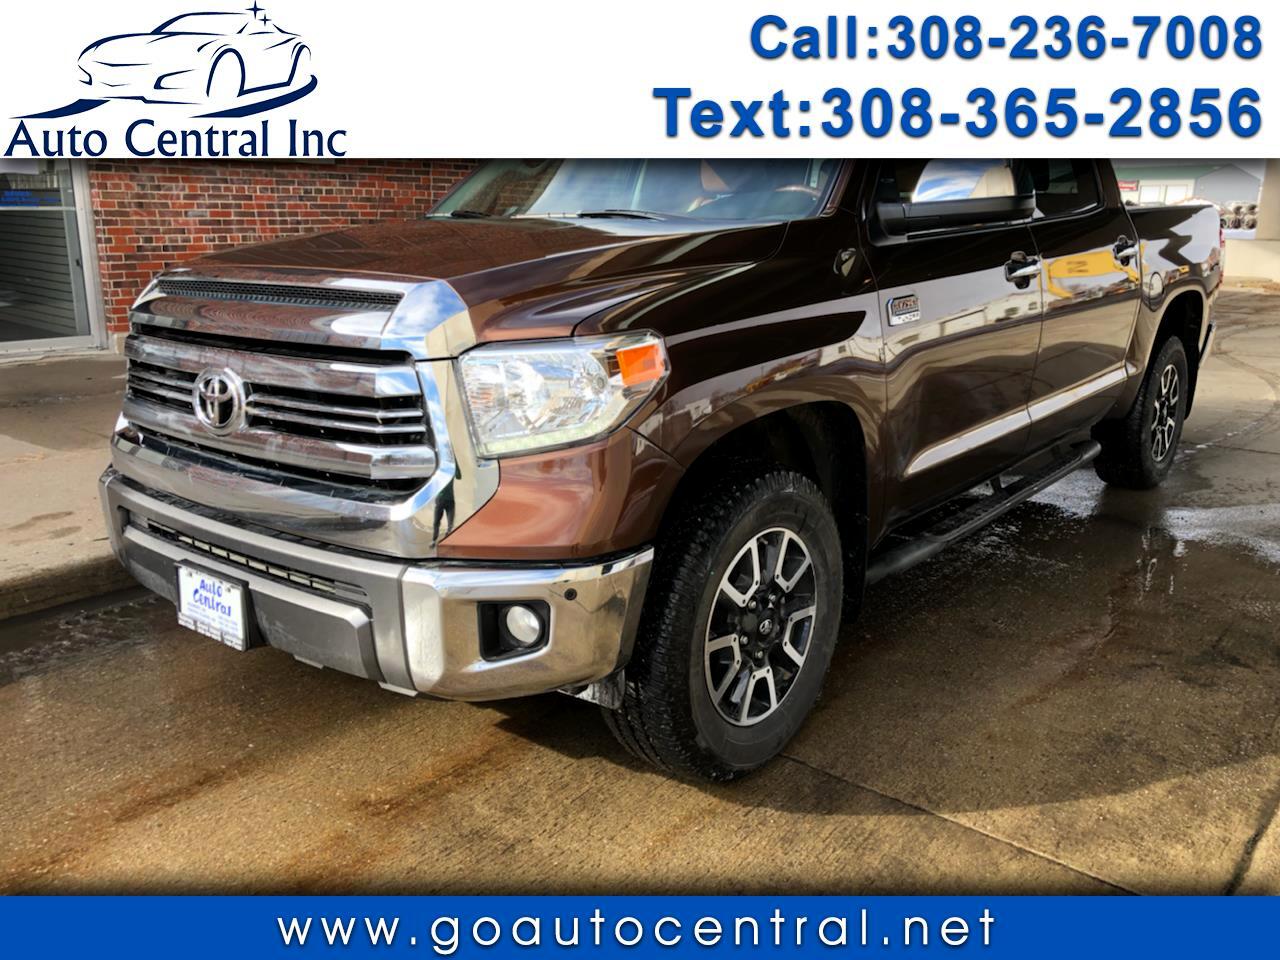 Used 2017 Toyota Tundra 4wd 1794 Edition Crewmax 5 5 Bed